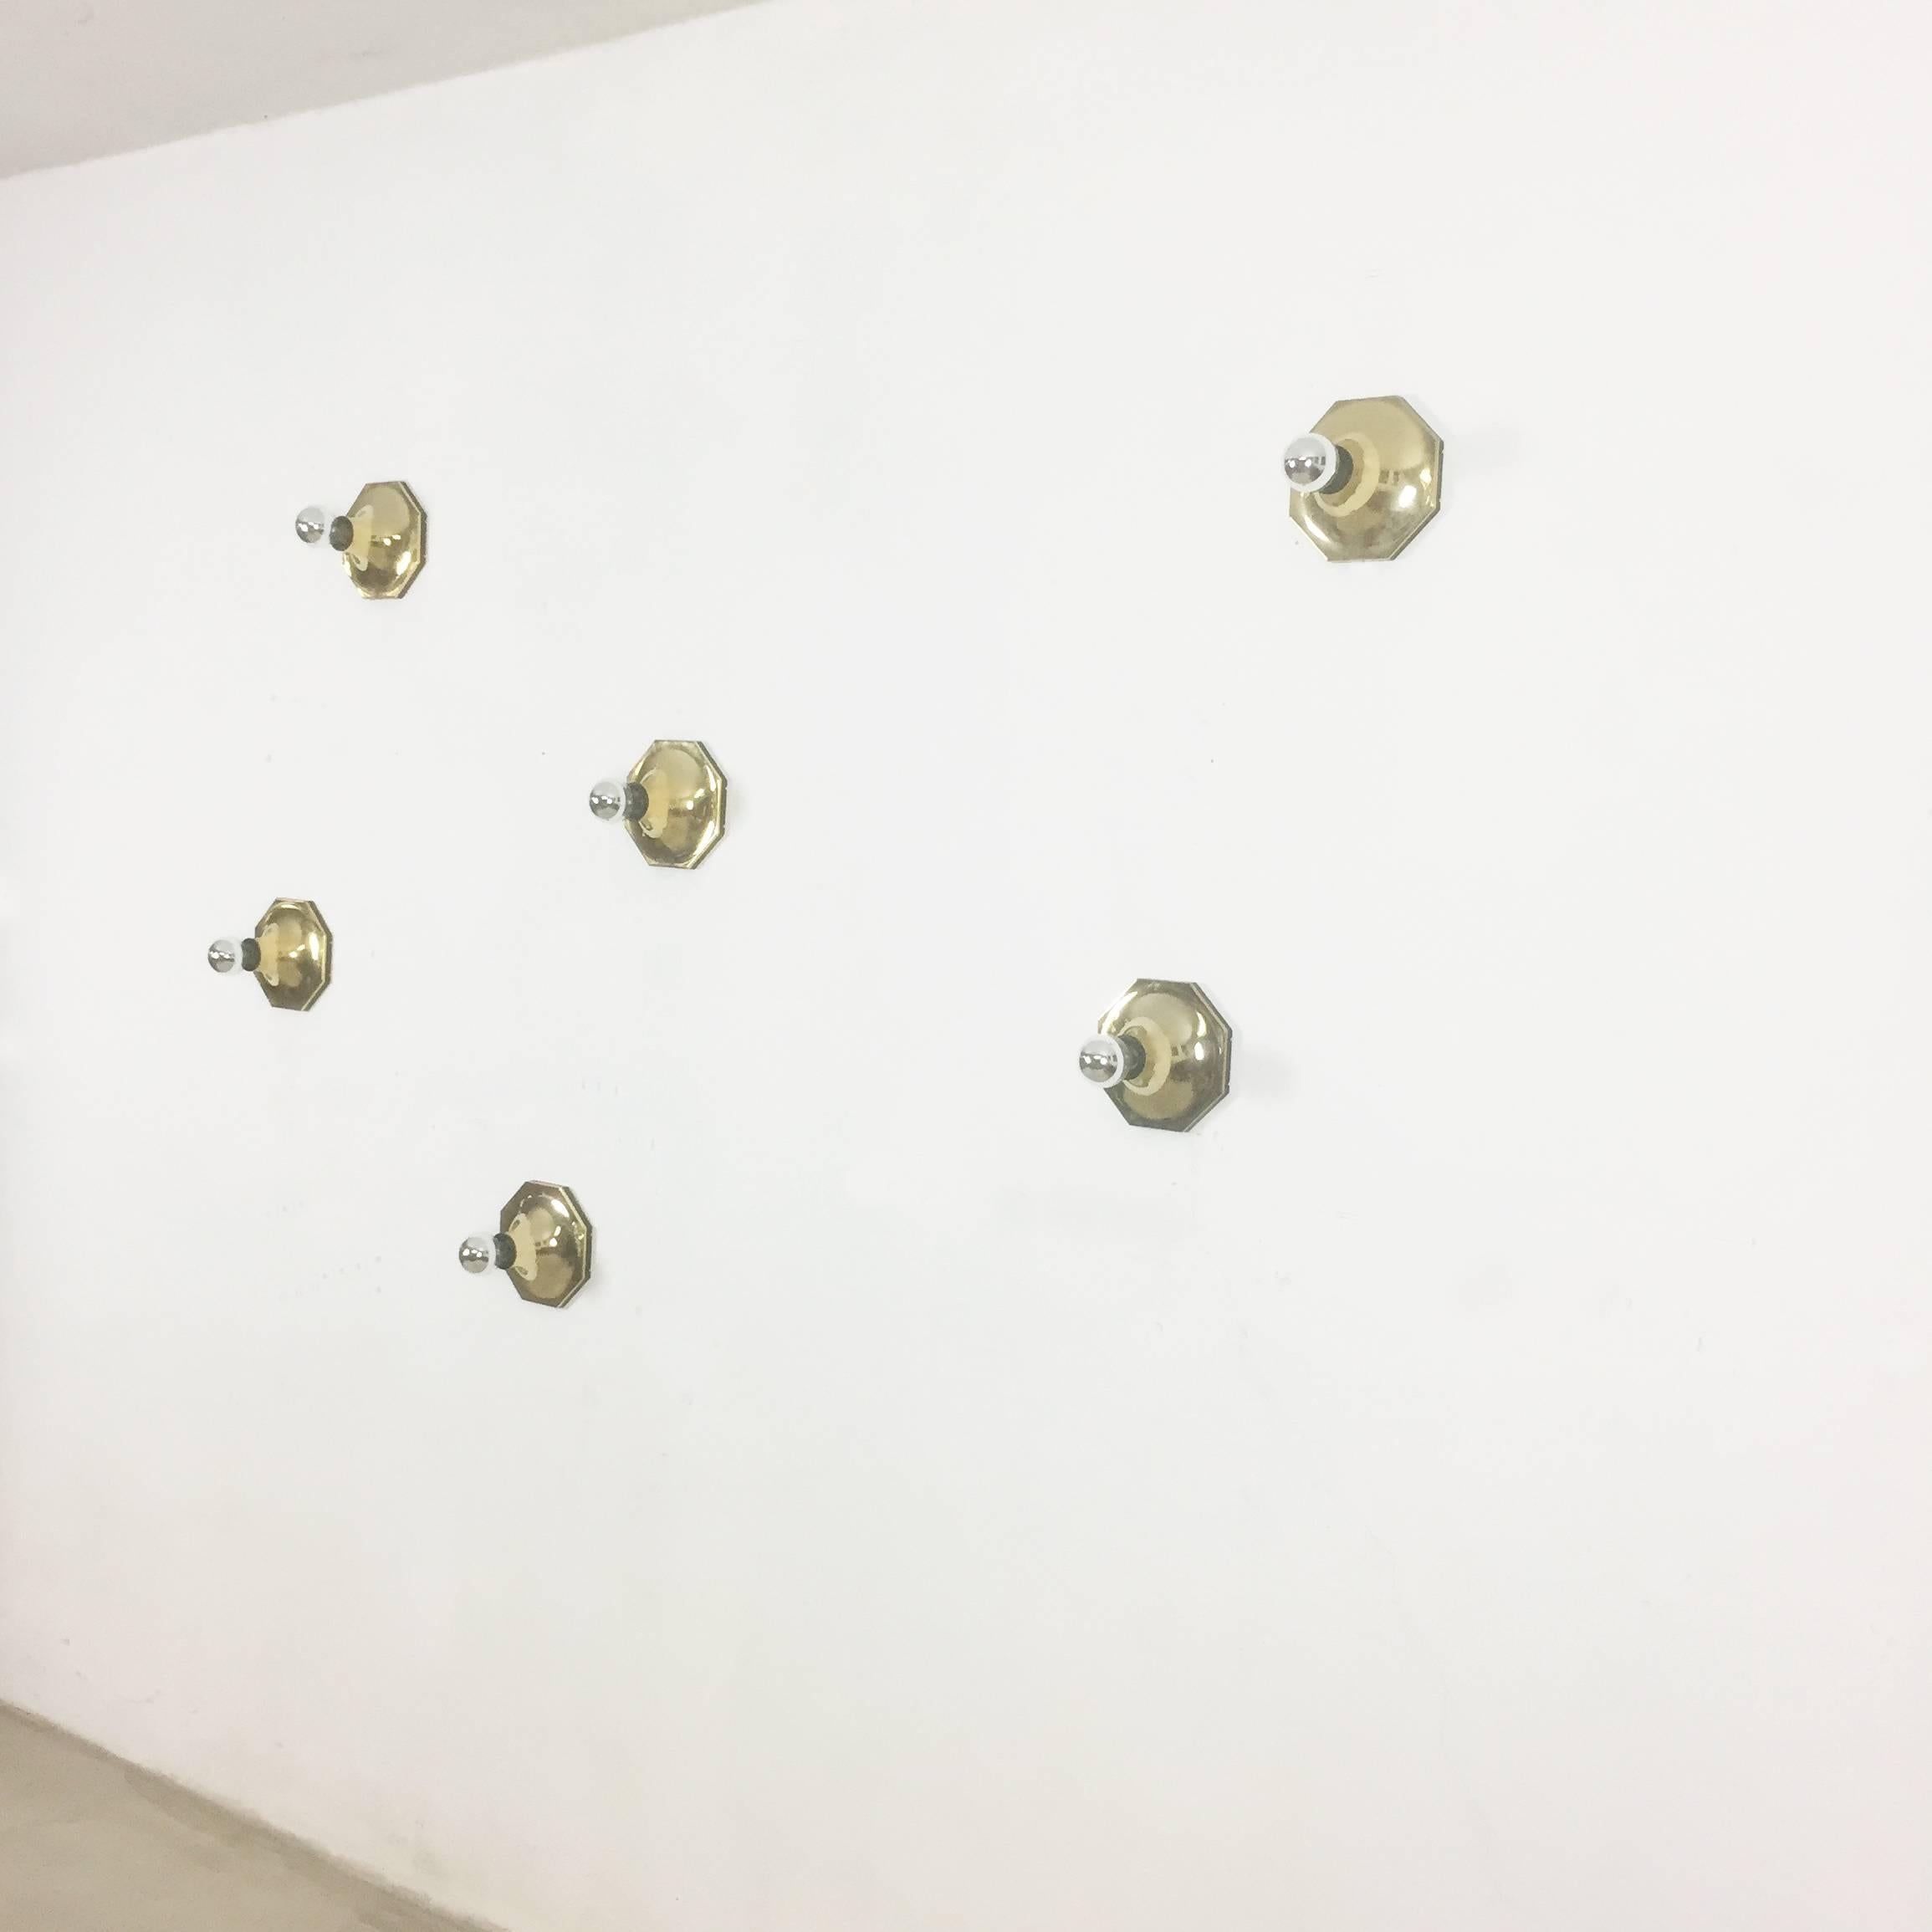 Article:

Set of six Cubic wall lights sconces



Producer:

Staff Lights, Germany


Design:

Motoko Ishii



Age:

1970s


Description:

Original 1970s golden metal lights made by Staff in Germany, designed by japanese star